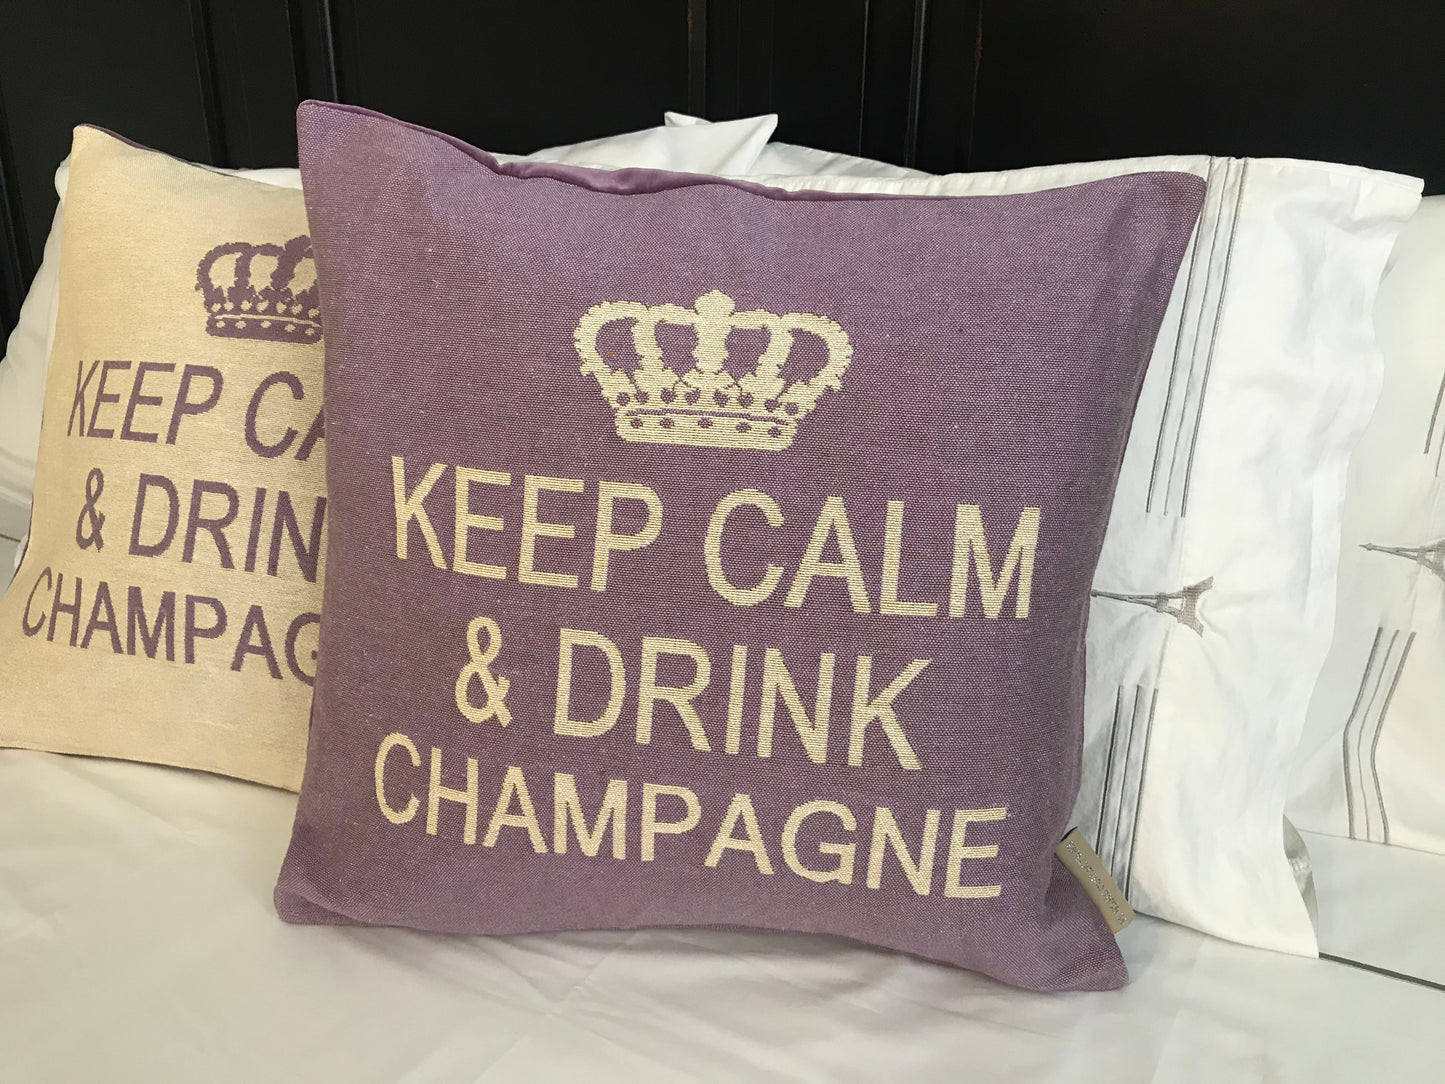 Keep Calm and Drink Champagne Decorative Pillow Cover - (Cream and Lilac)